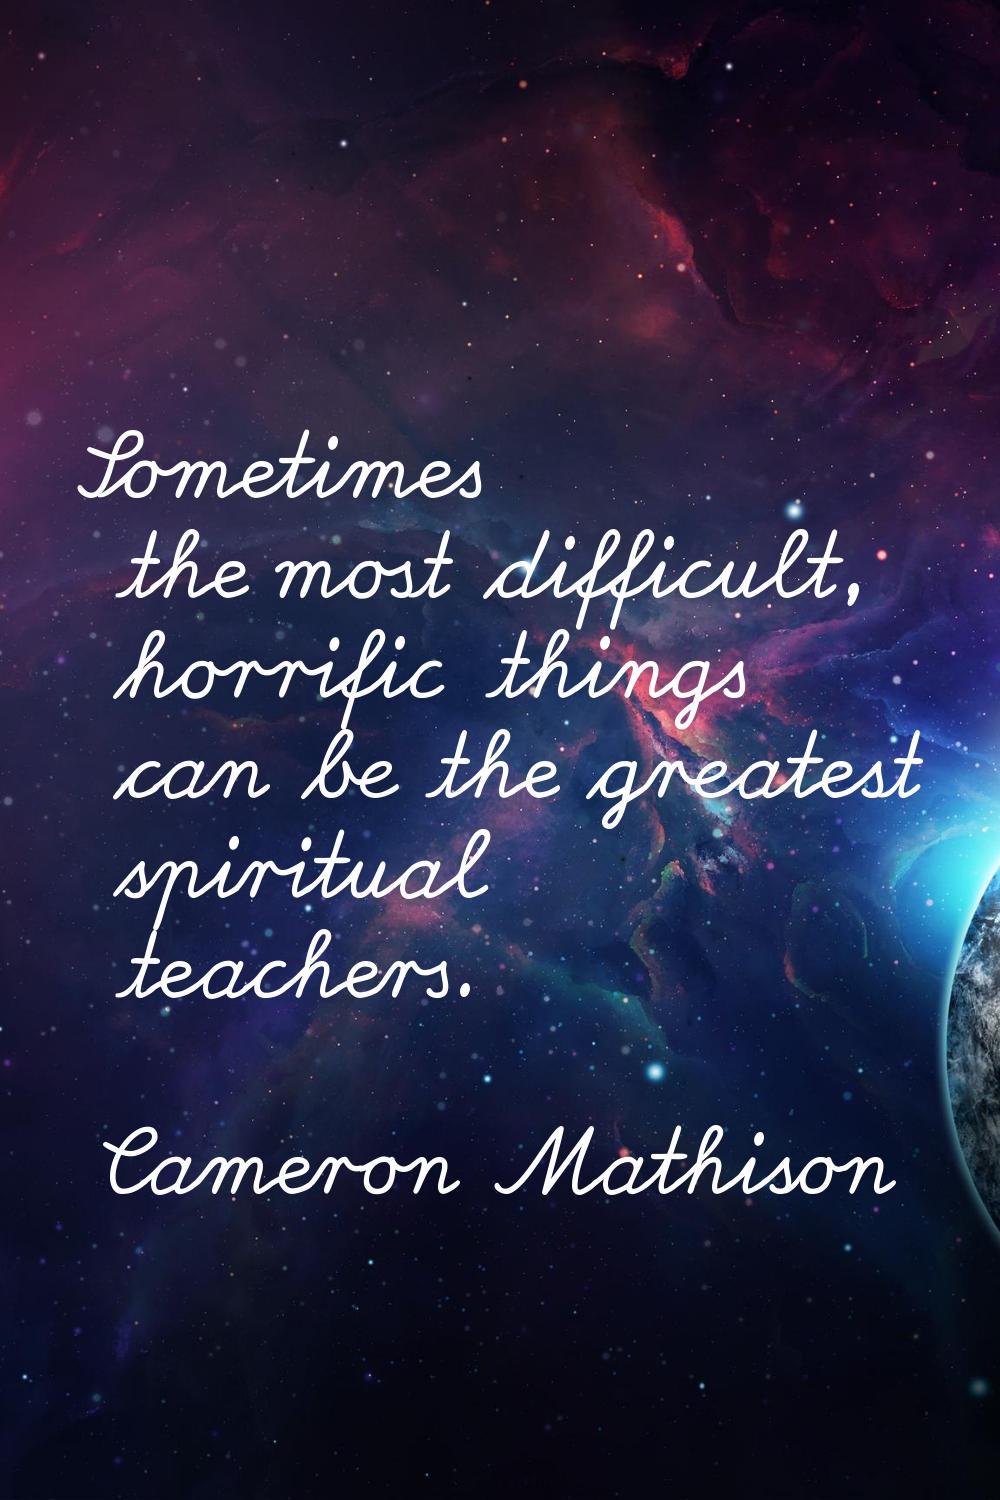 Sometimes the most difficult, horrific things can be the greatest spiritual teachers.